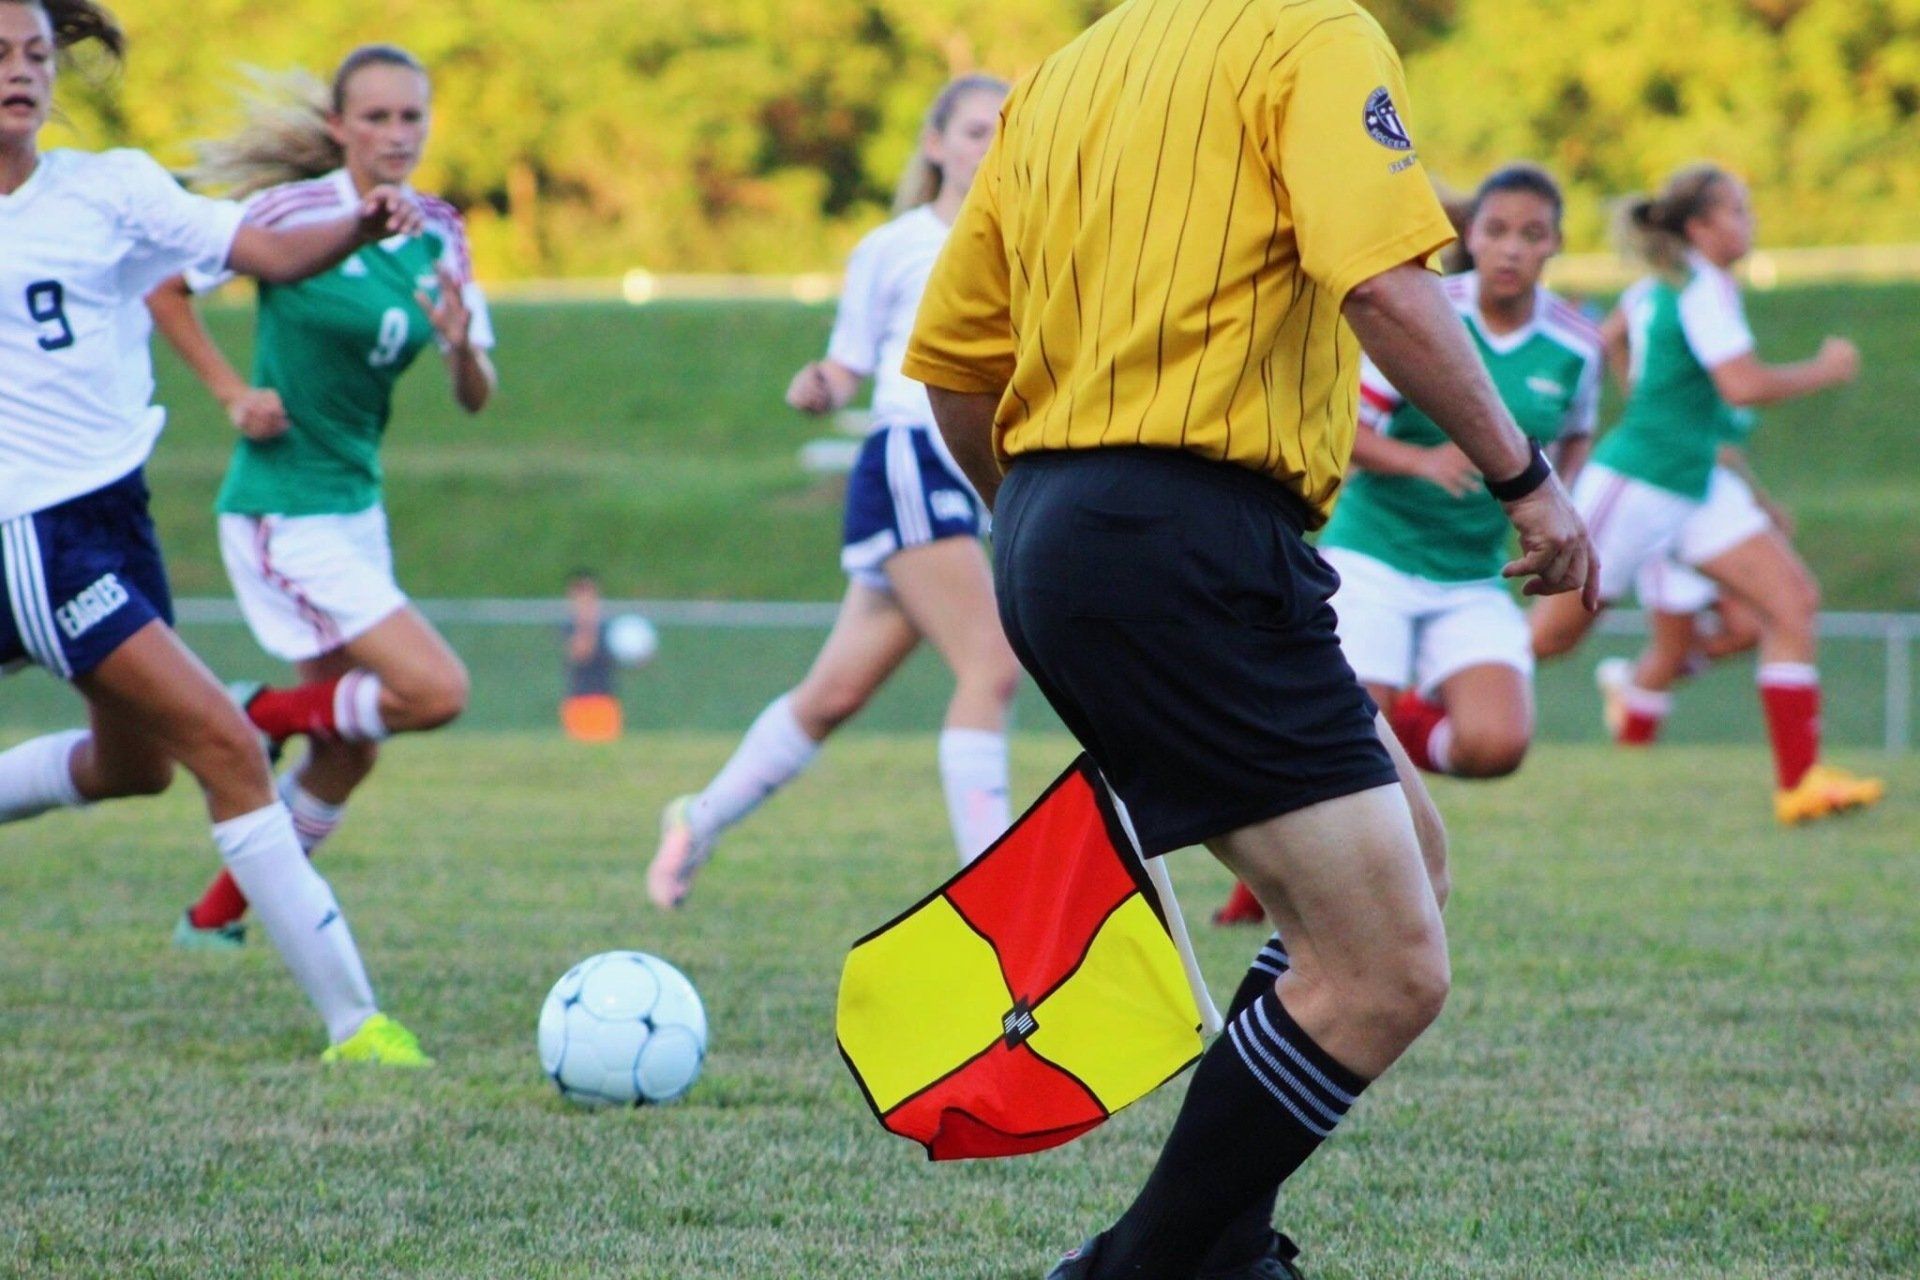 a referee is holding a red and yellow flag while playing soccer .